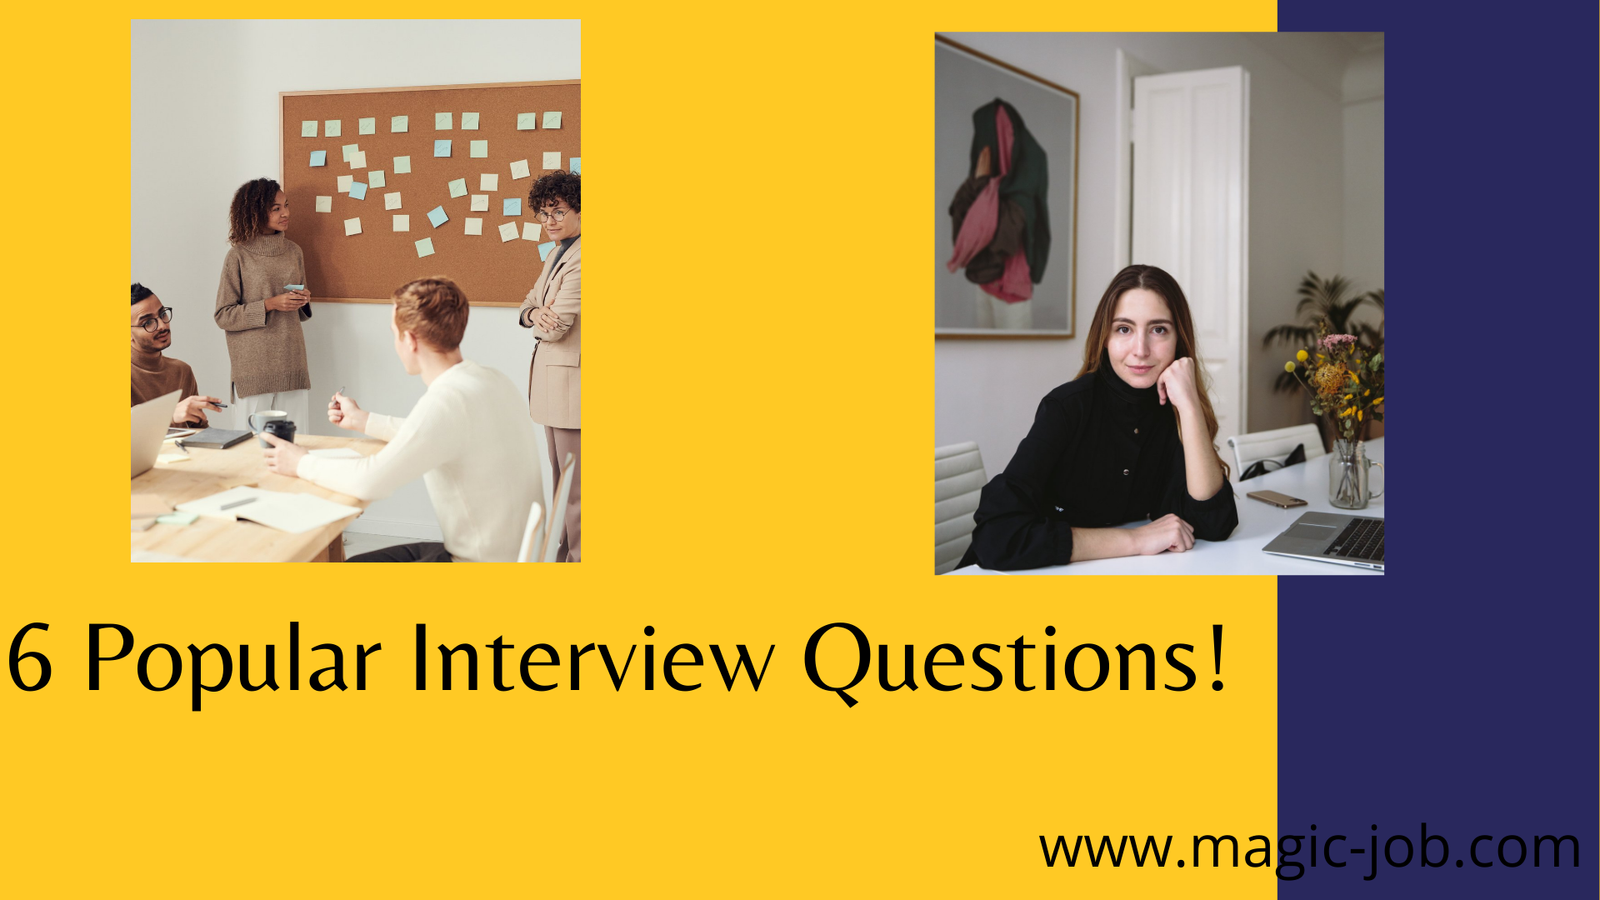 6 Popular Interview Questions - What Is the Unseen Meaning? image